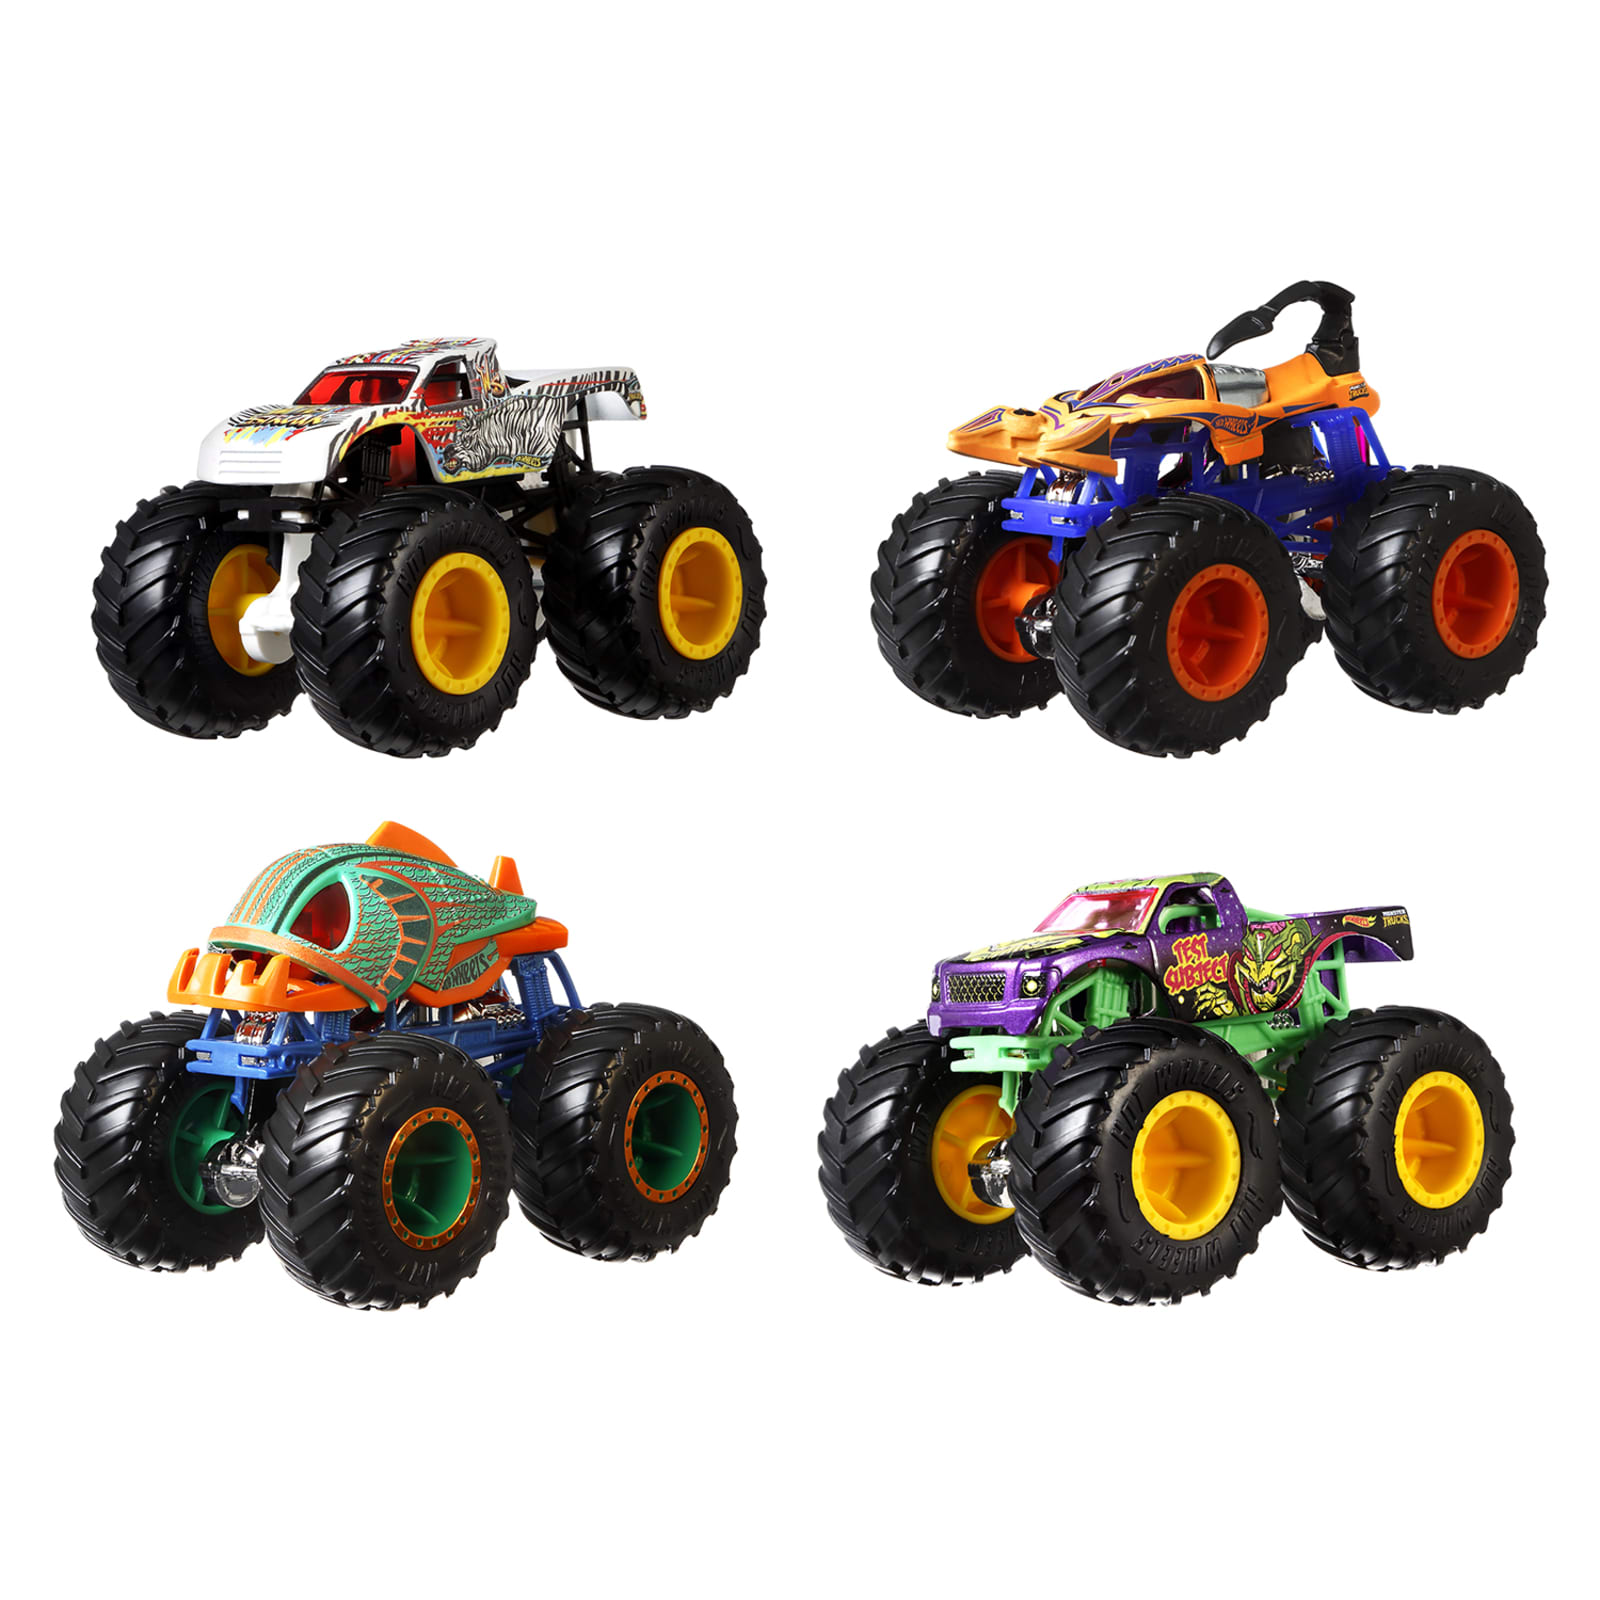 Smash Crashers Series 1 Rusty Rigs Collectible Toy Vehicle NEW Crash the  Truck